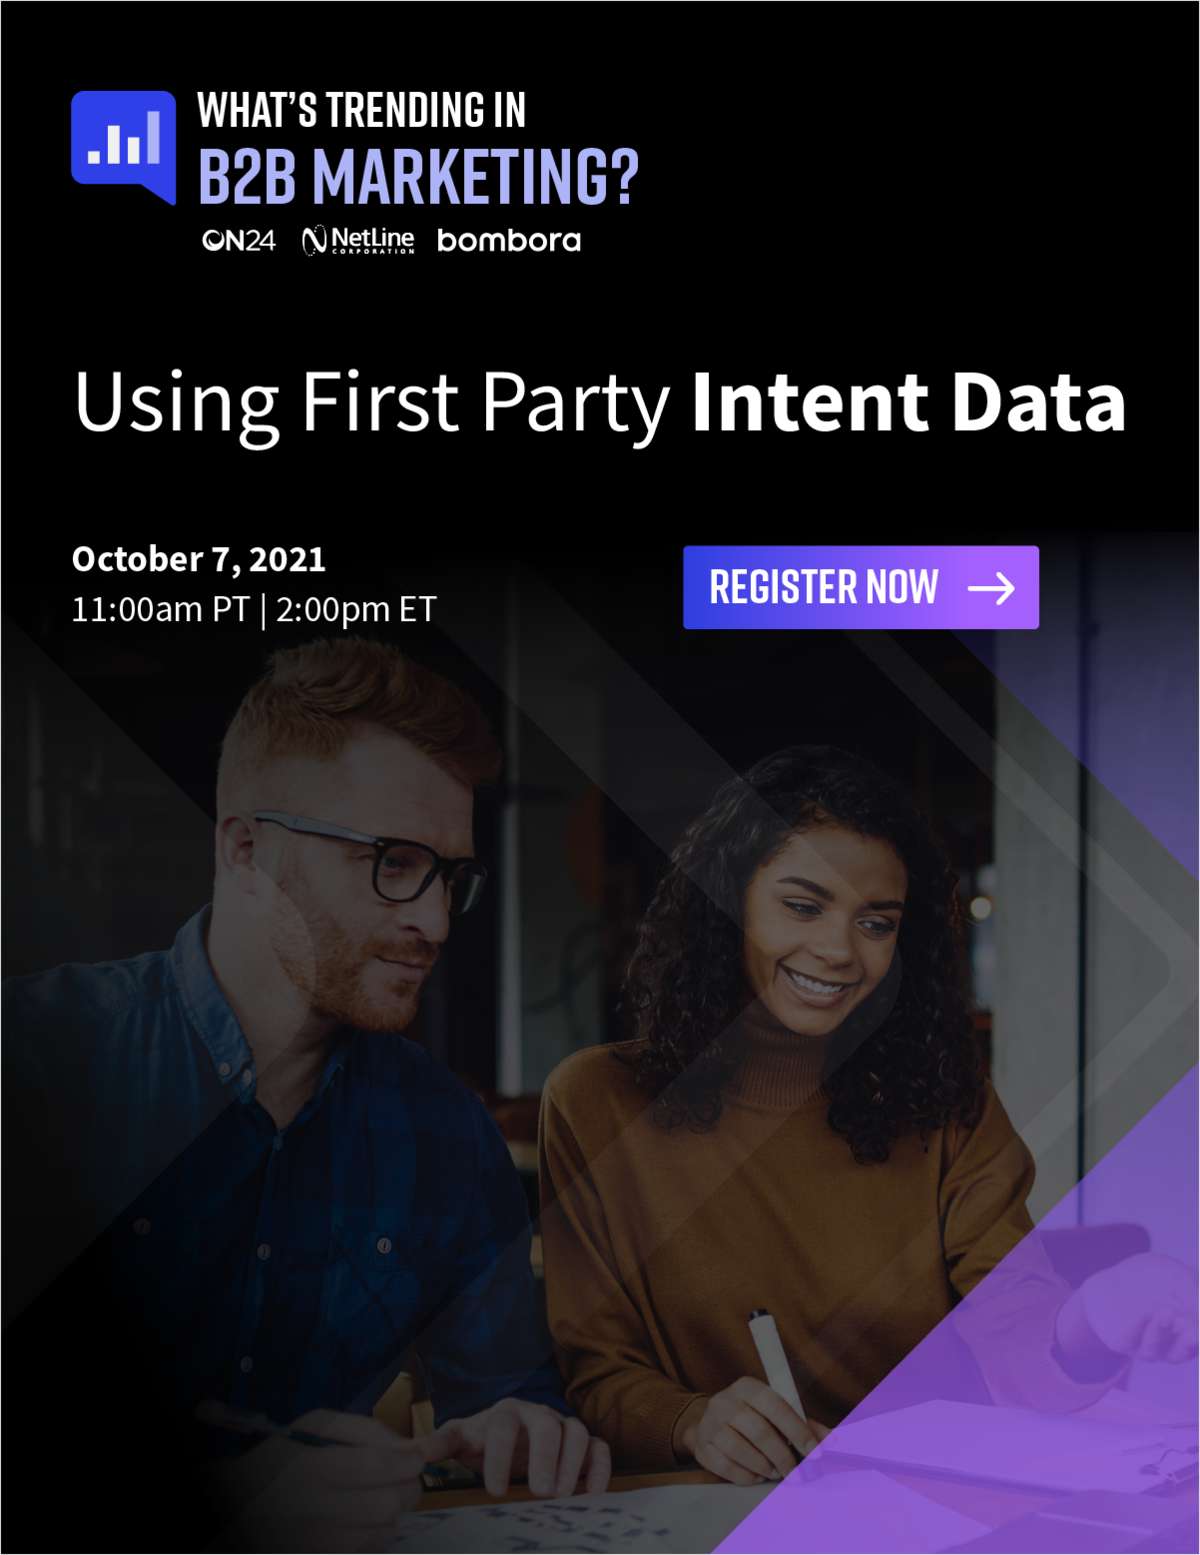 What's Trending in B2B Marketing? Using First Party Intent Data